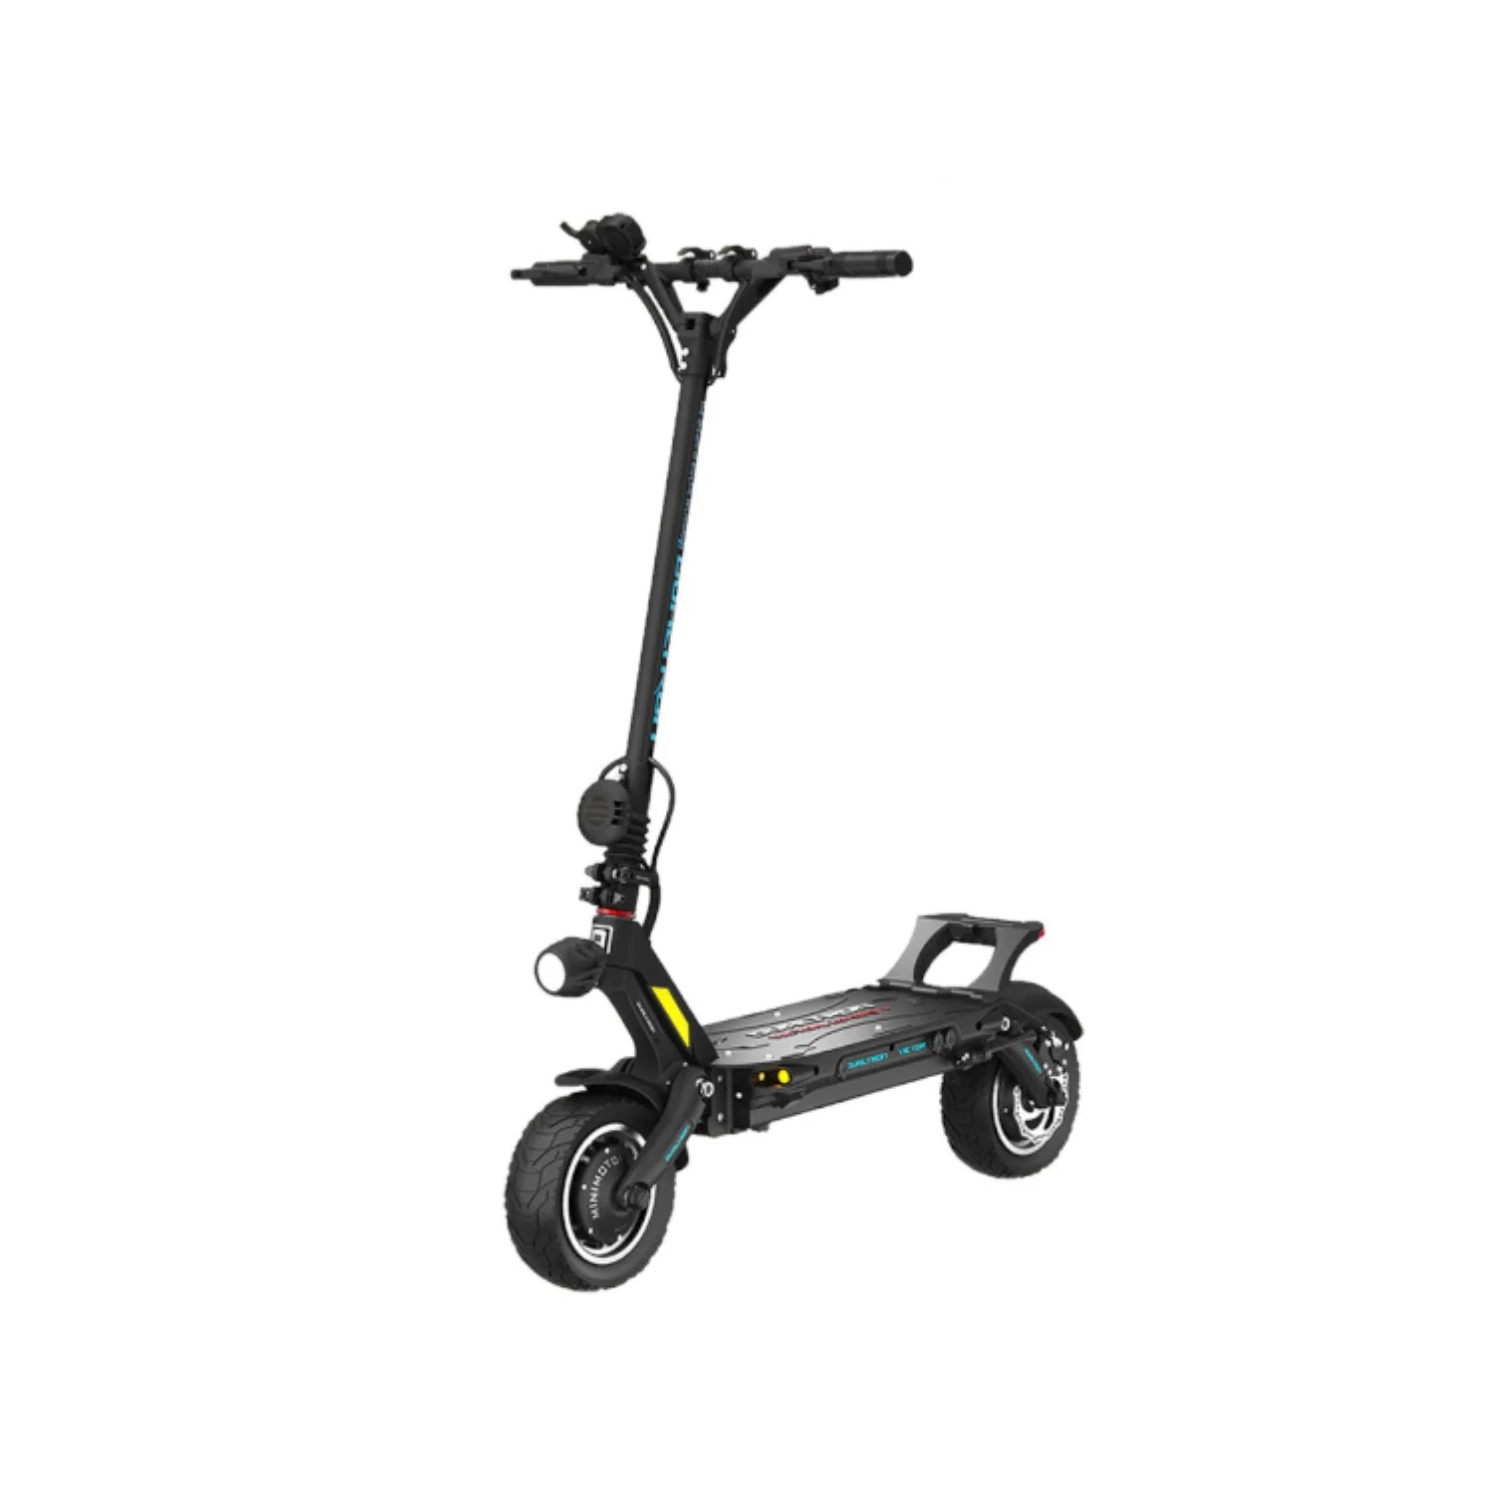 Dualtron Victor Luxury Plus Electric Scooter (60V, 35Ah LG) | Dual Motor | Full Suspension | 120KM Range | 85KM/h Top Speed | Foldable Electric Scooter for Adults